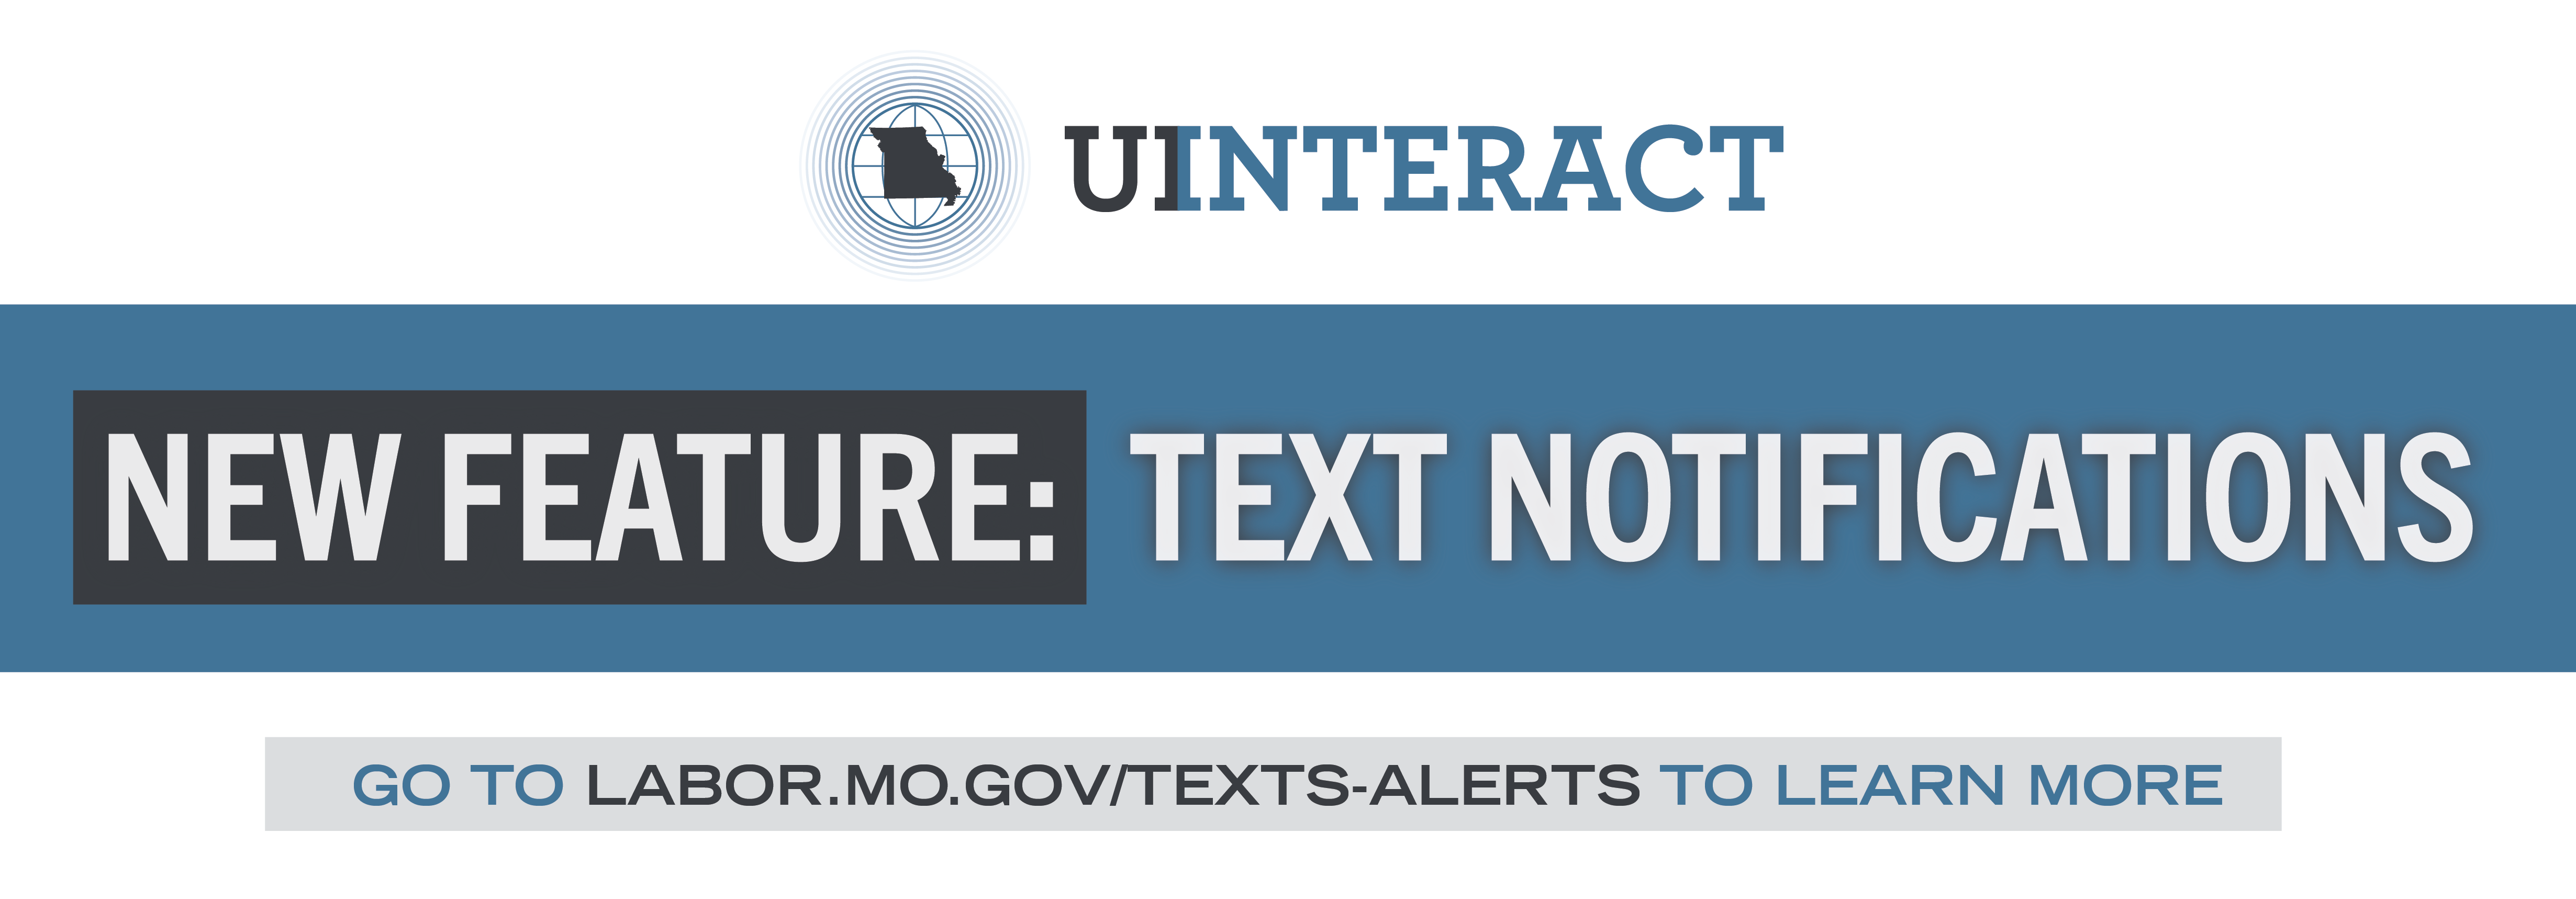 UInteract - New Feature: Text Notifications